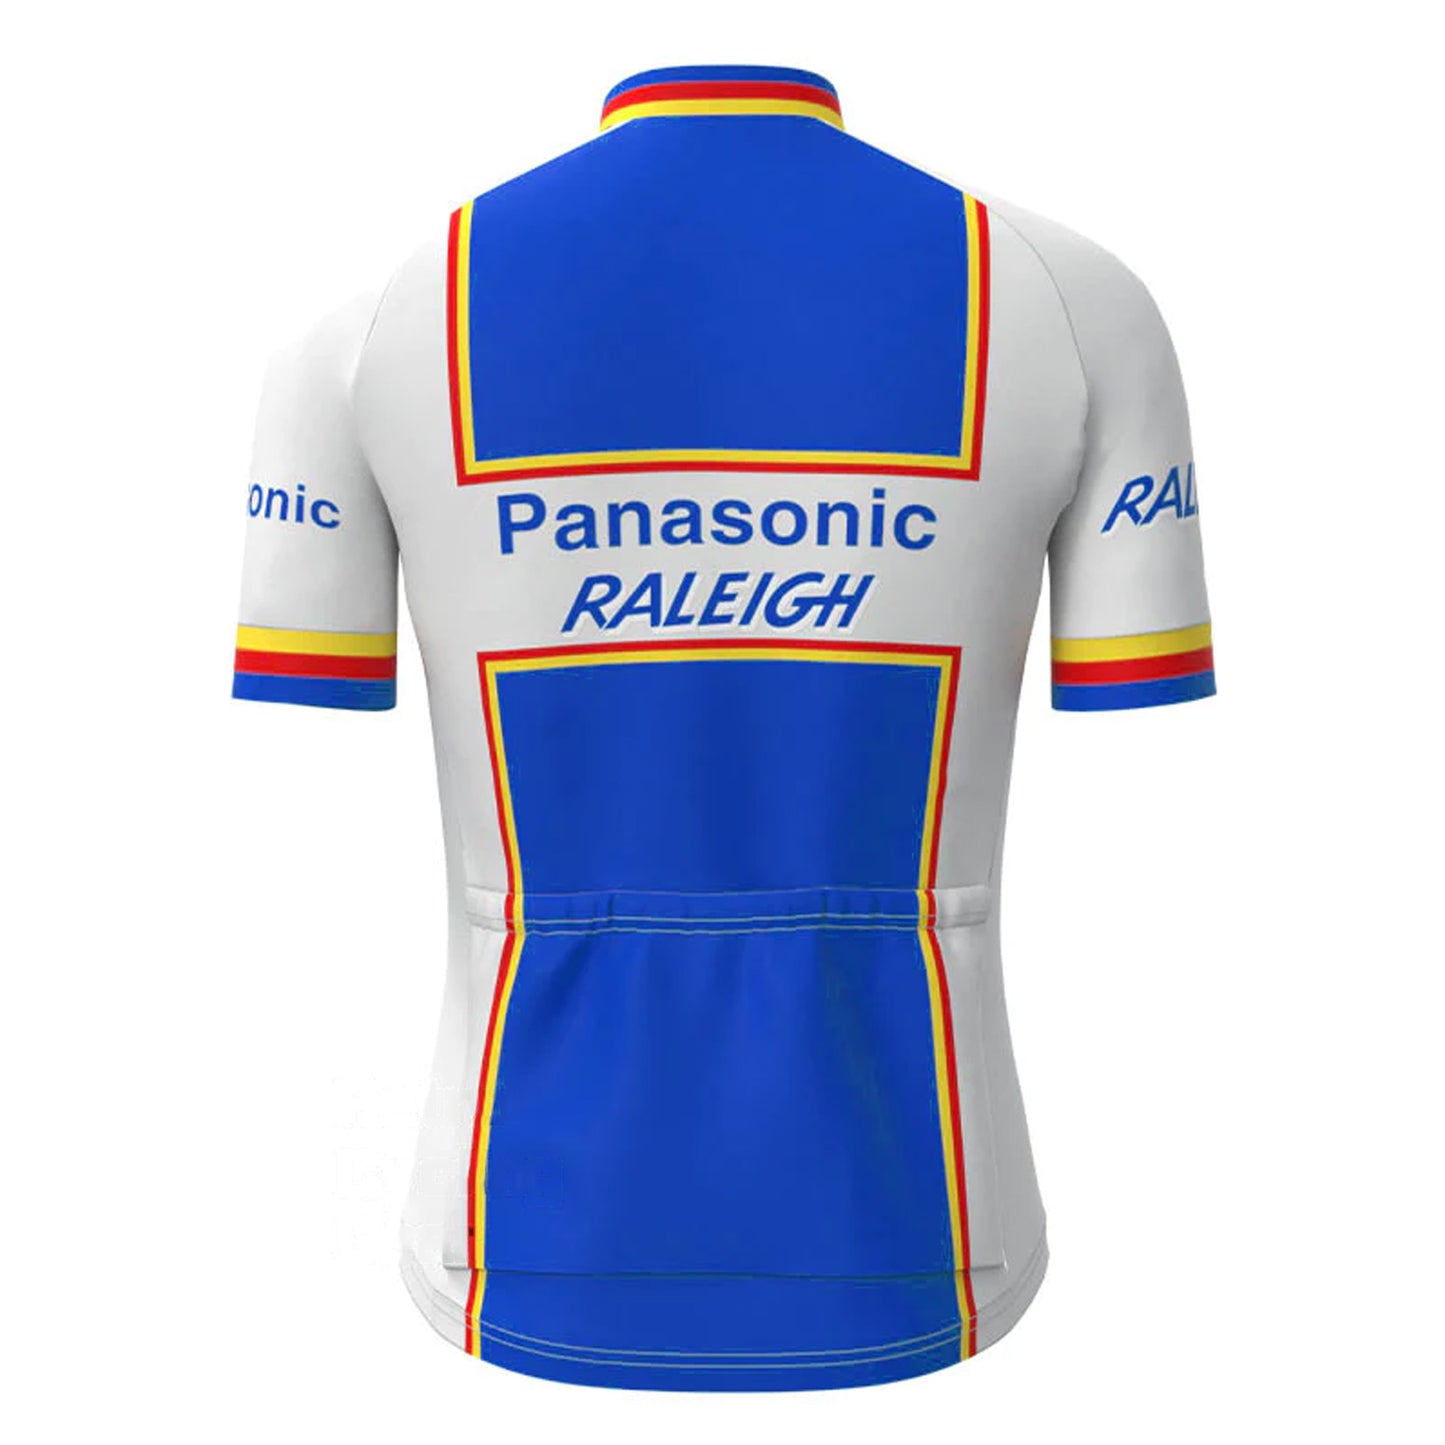 Panasonic Raleigh Blue Vintage Short Sleeve Cycling Jersey Top